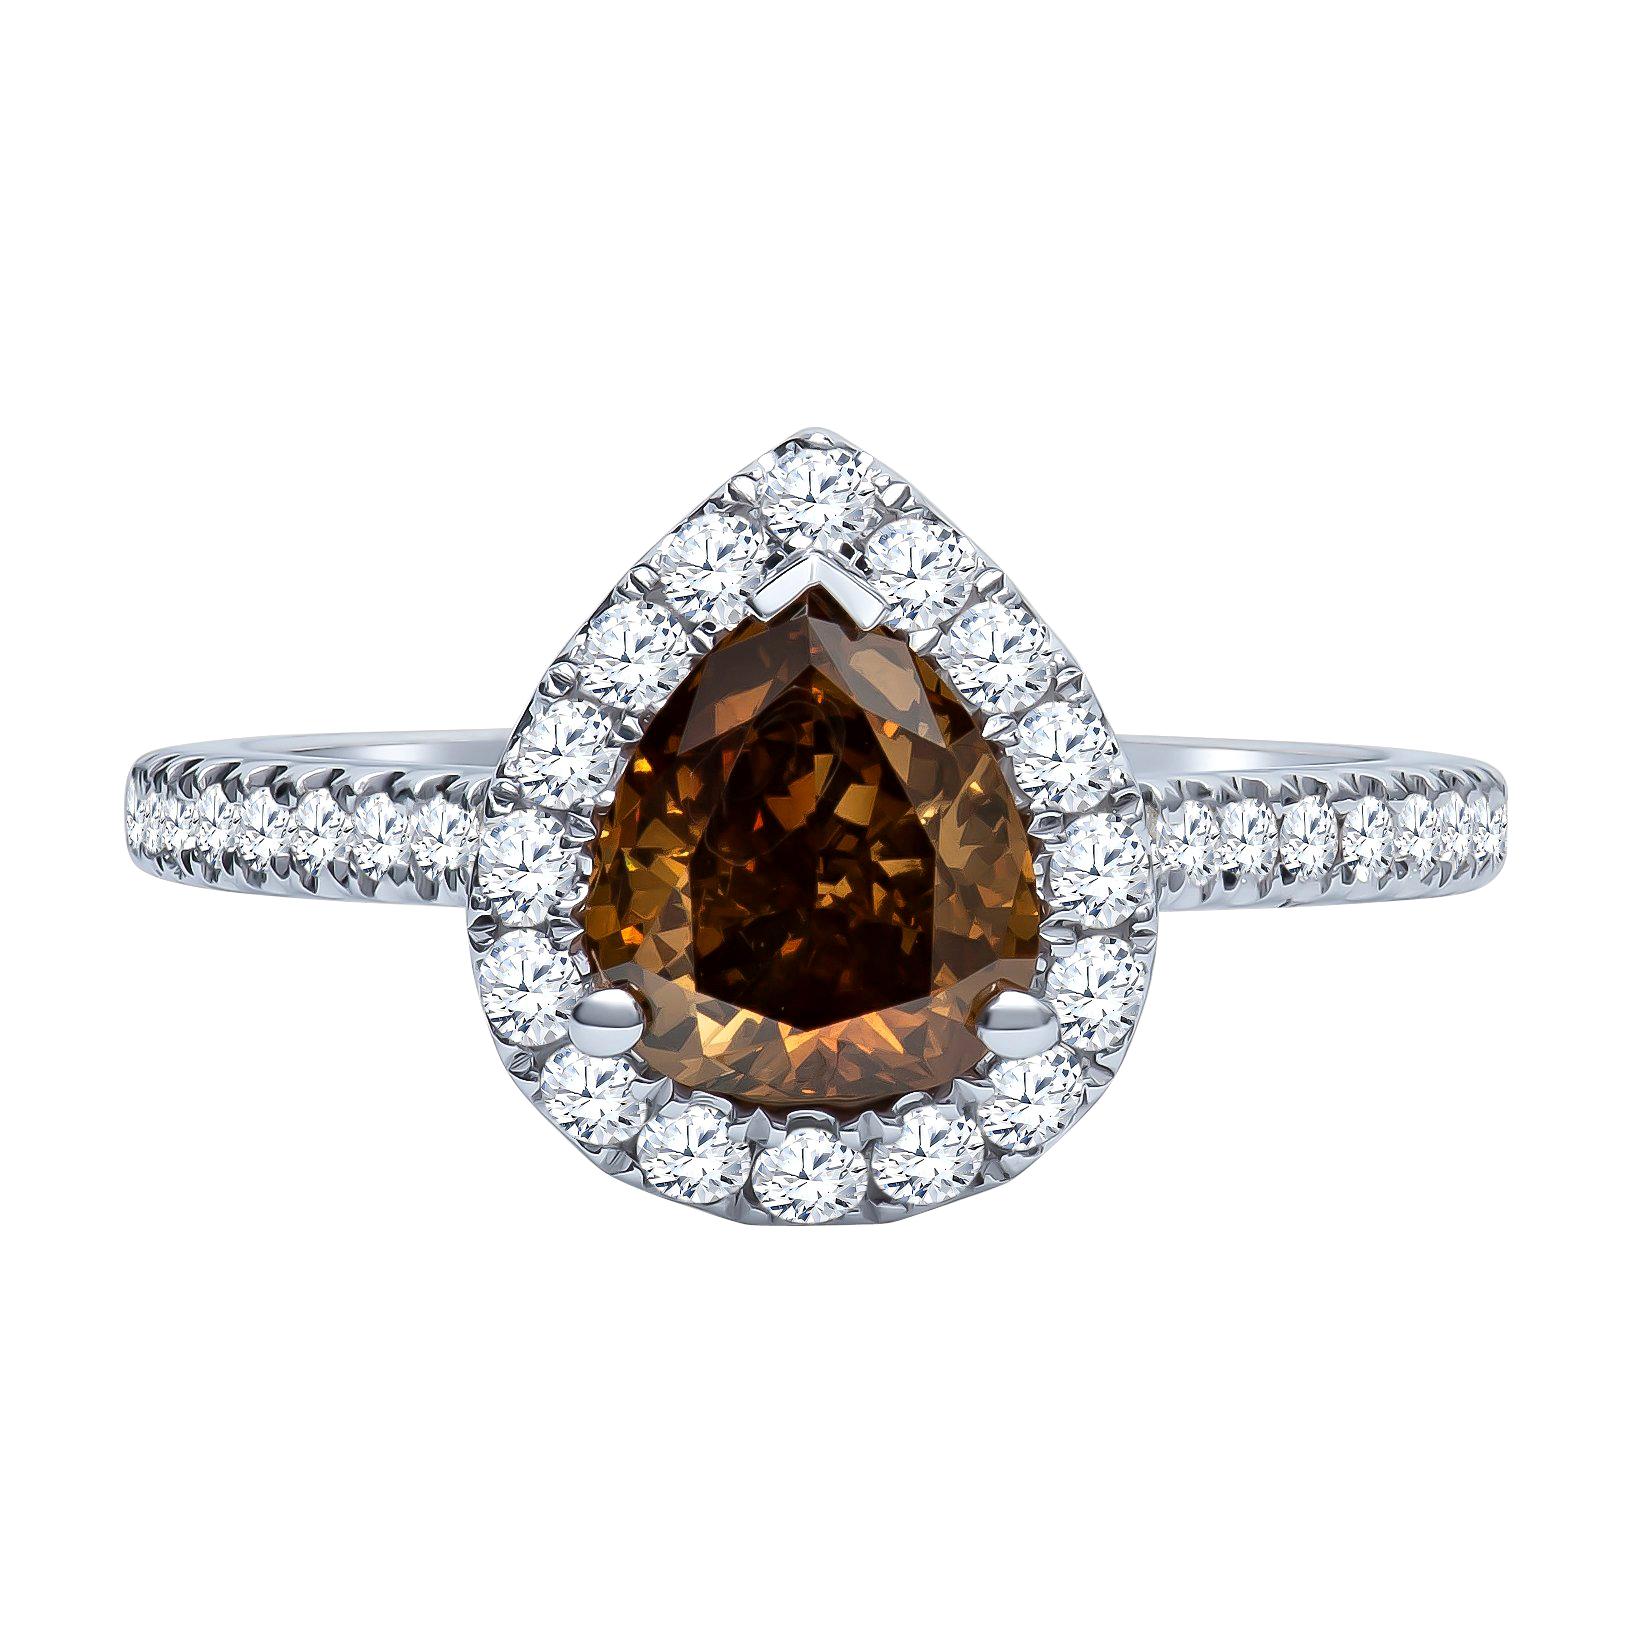 1.21 Carat Pear Shape Fancy Dark Yellow Brown Diamond Halo Engagement Ring For Sale